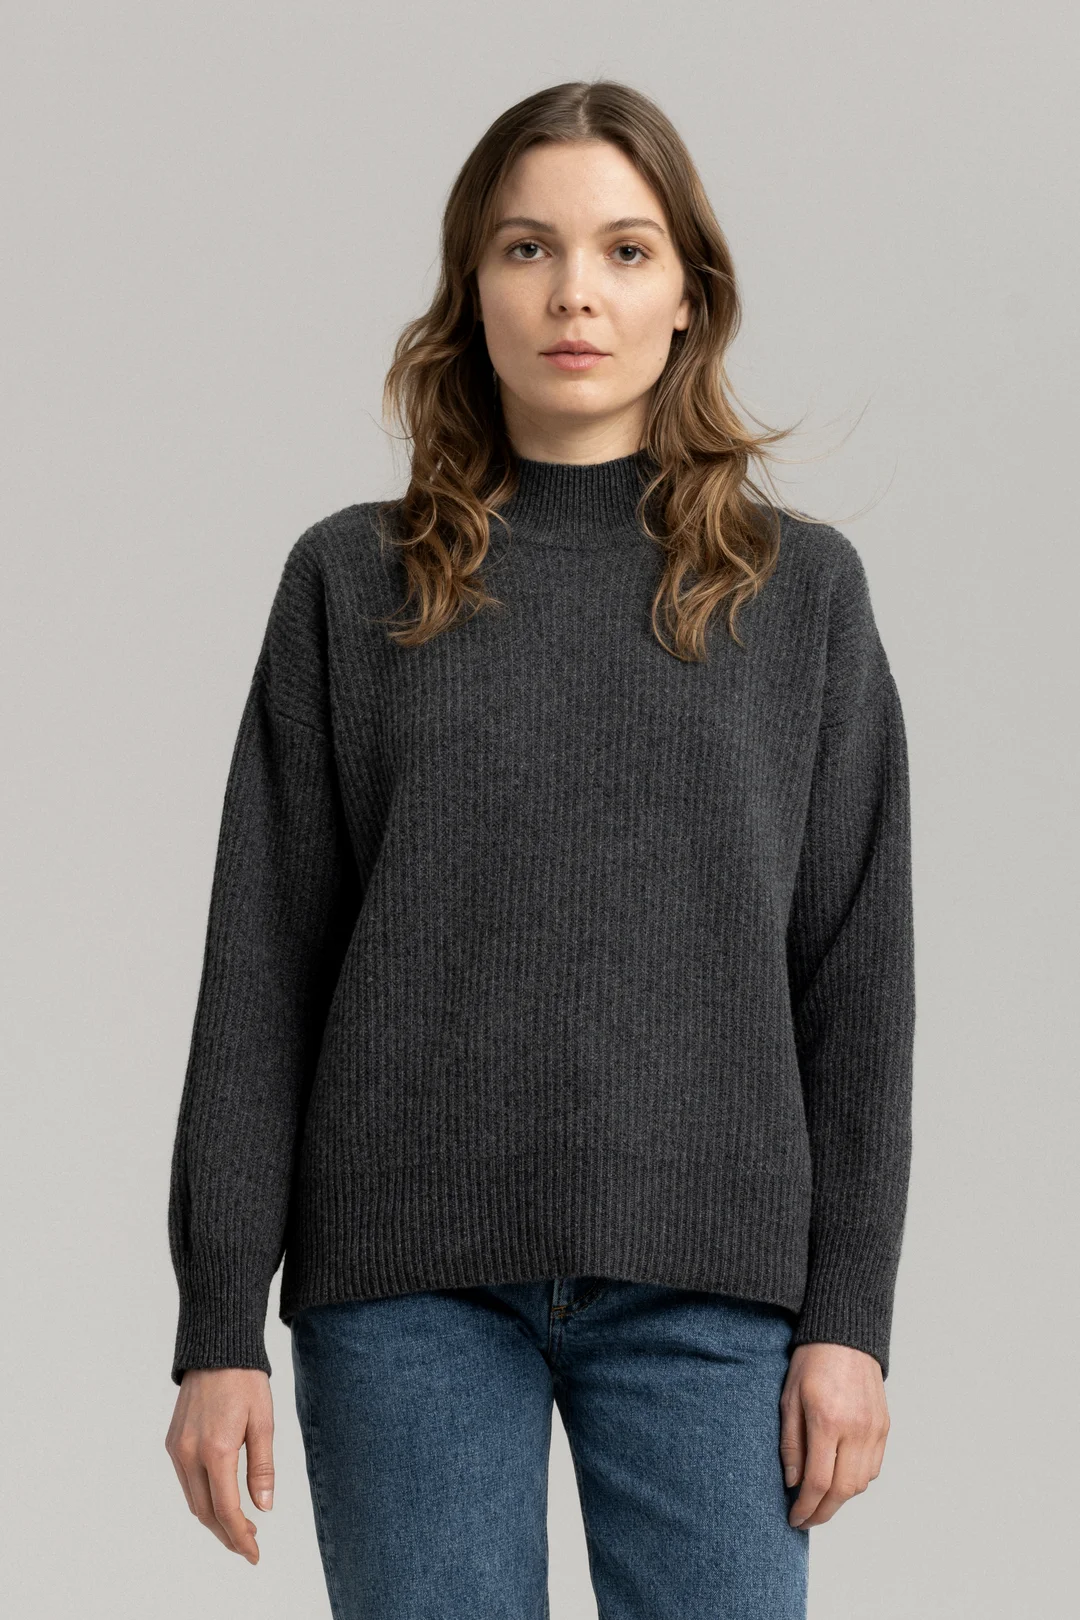 Charcoal Melange Mock Neck Sweater | 100% Recycled Wool - ASKET